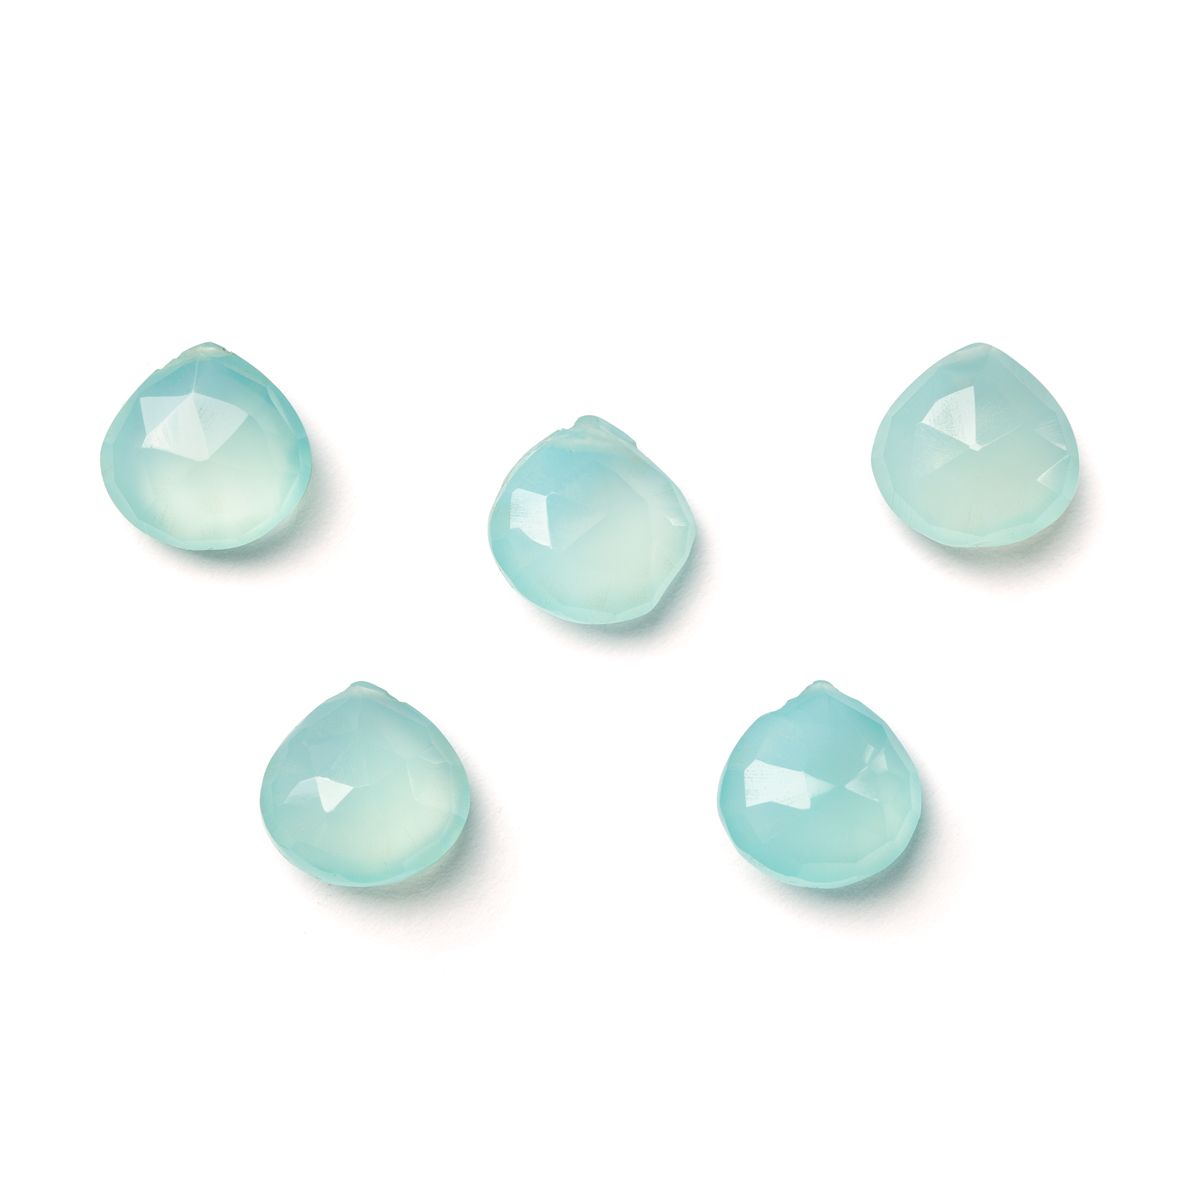 Aqua Blue Chalcedony Faceted Heart Briolette Beads, Approx 10mm